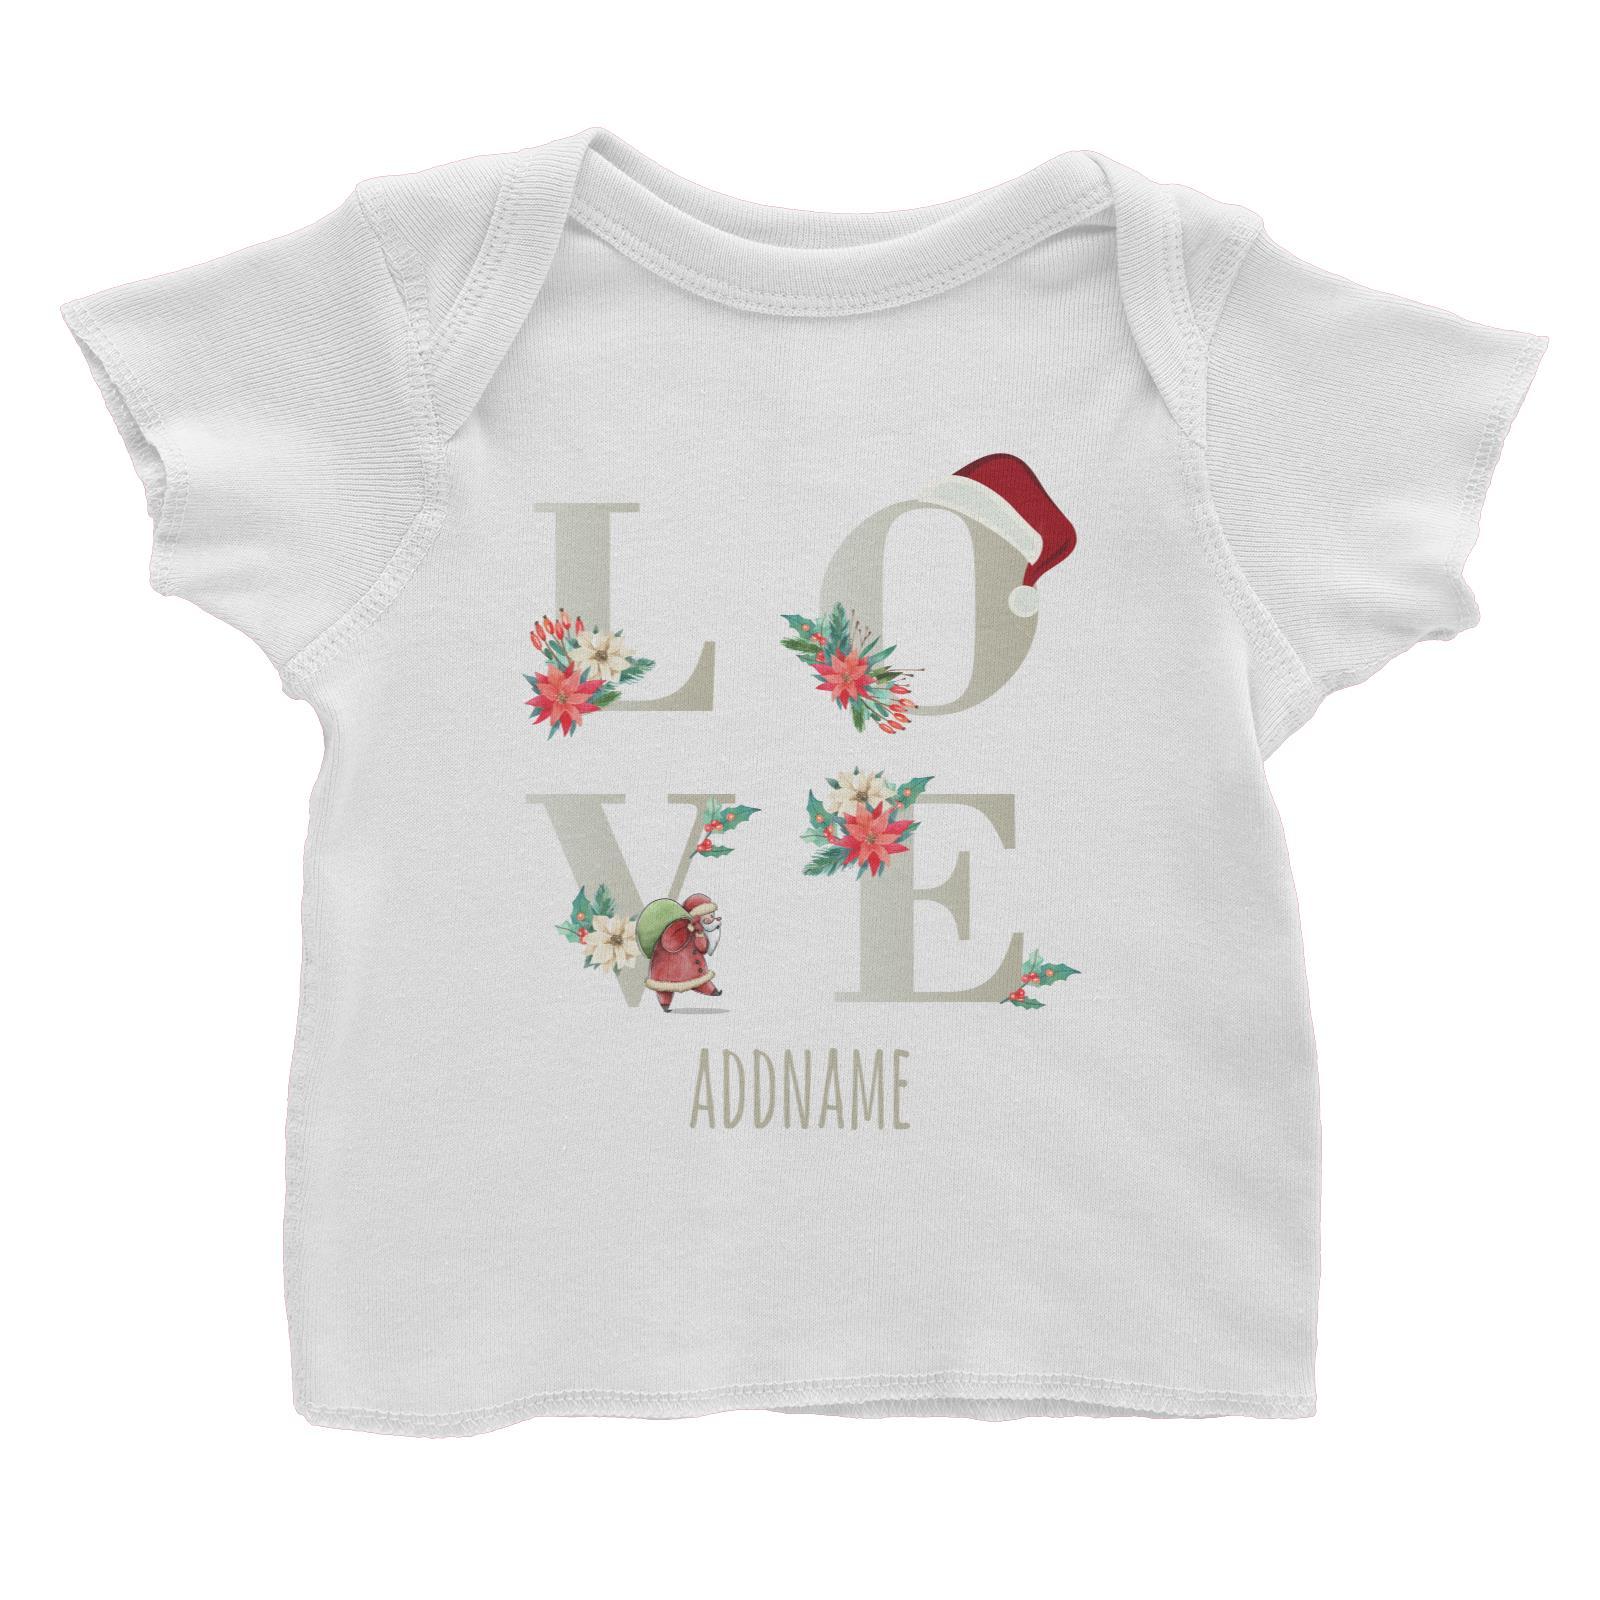 LOVE with Christmas Elements Addname Baby T-Shirt